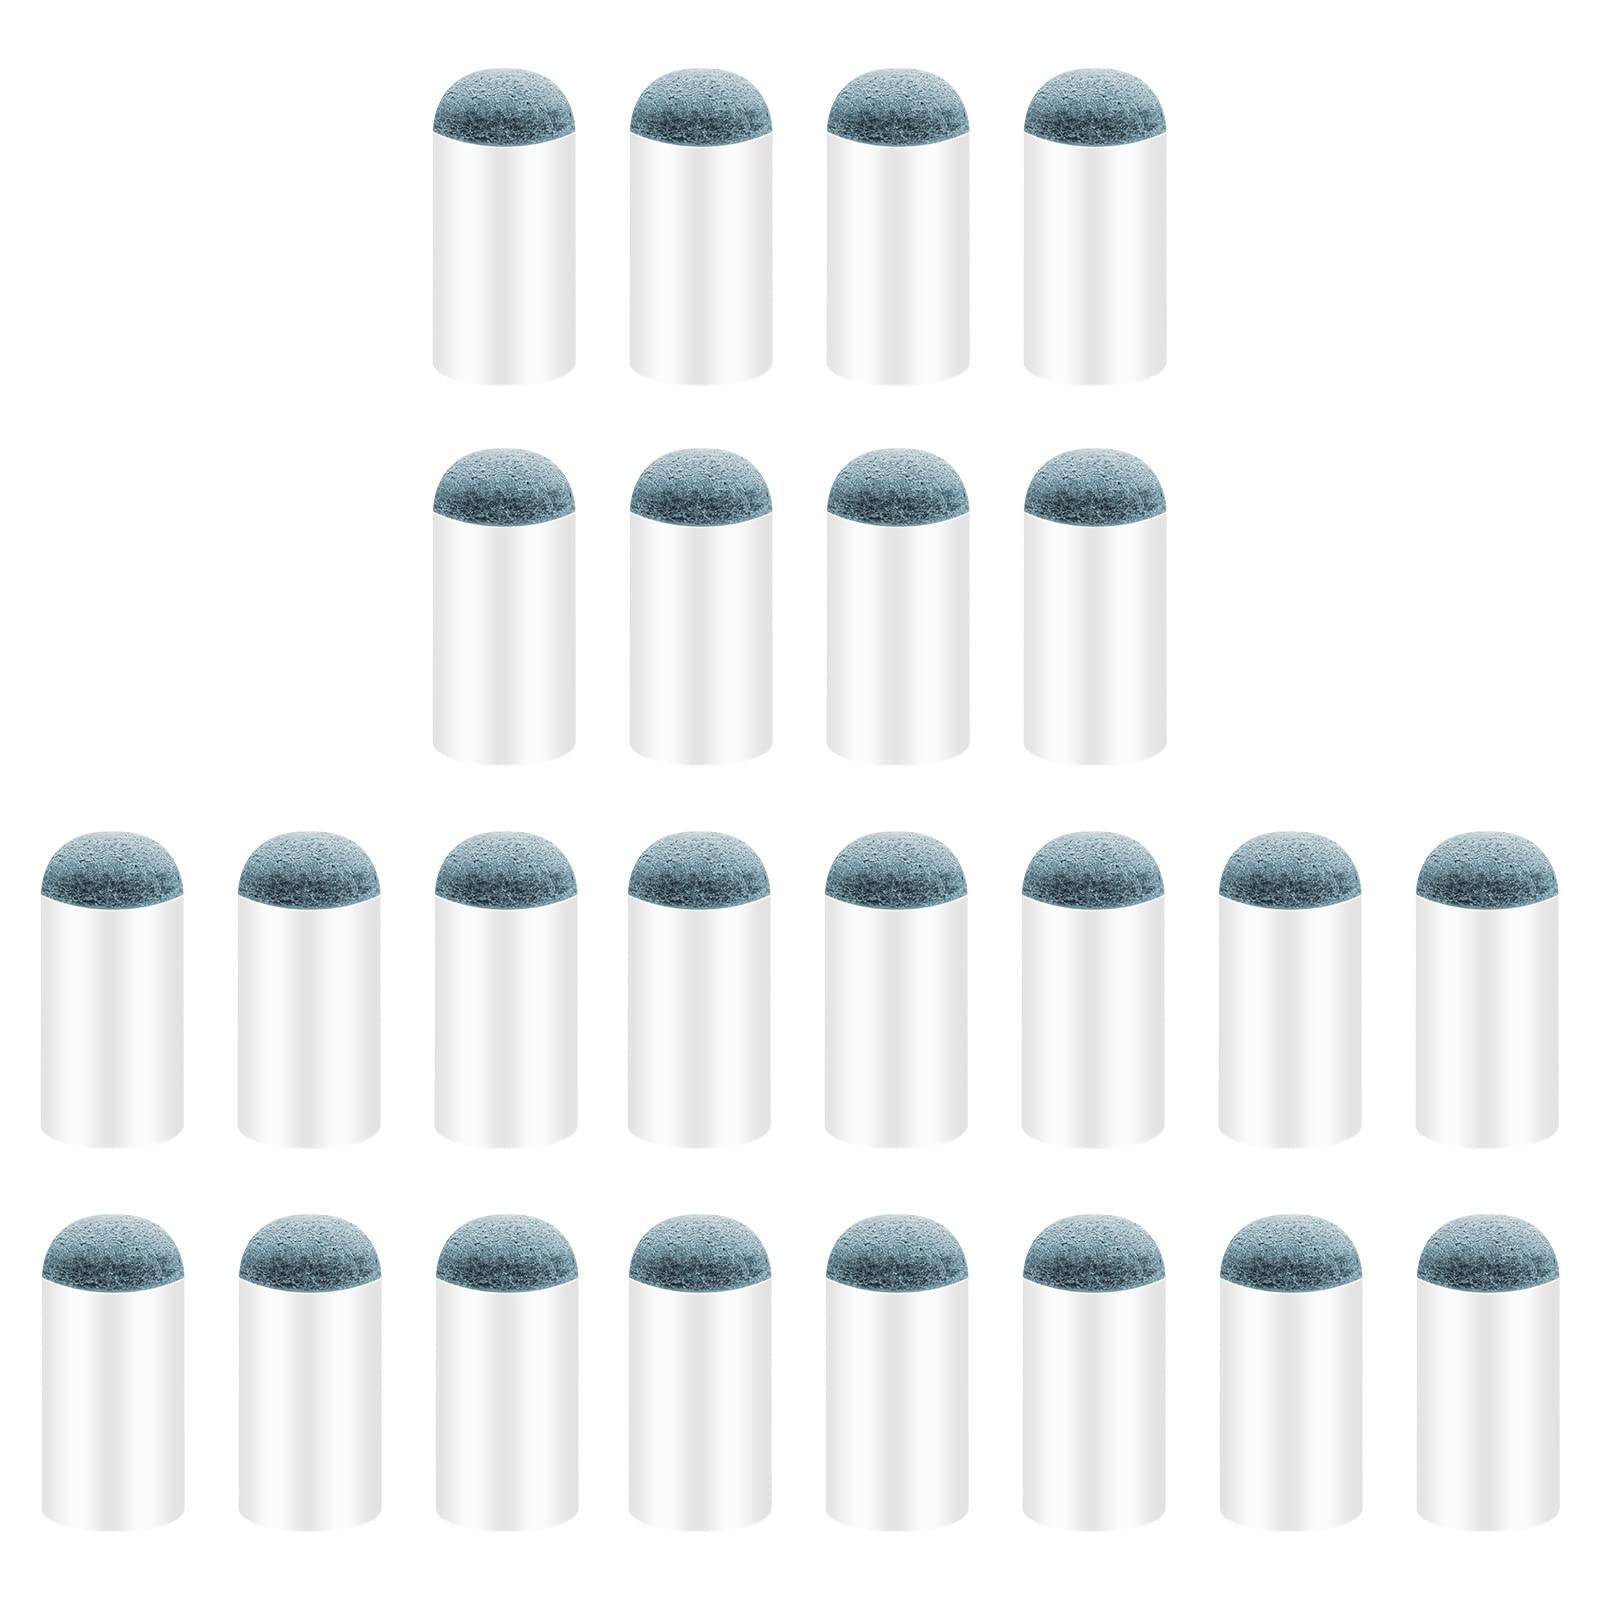 Prasacco 24 Pieces Pool Stick Tips, 13mm Pool Cue Tips Slip-On